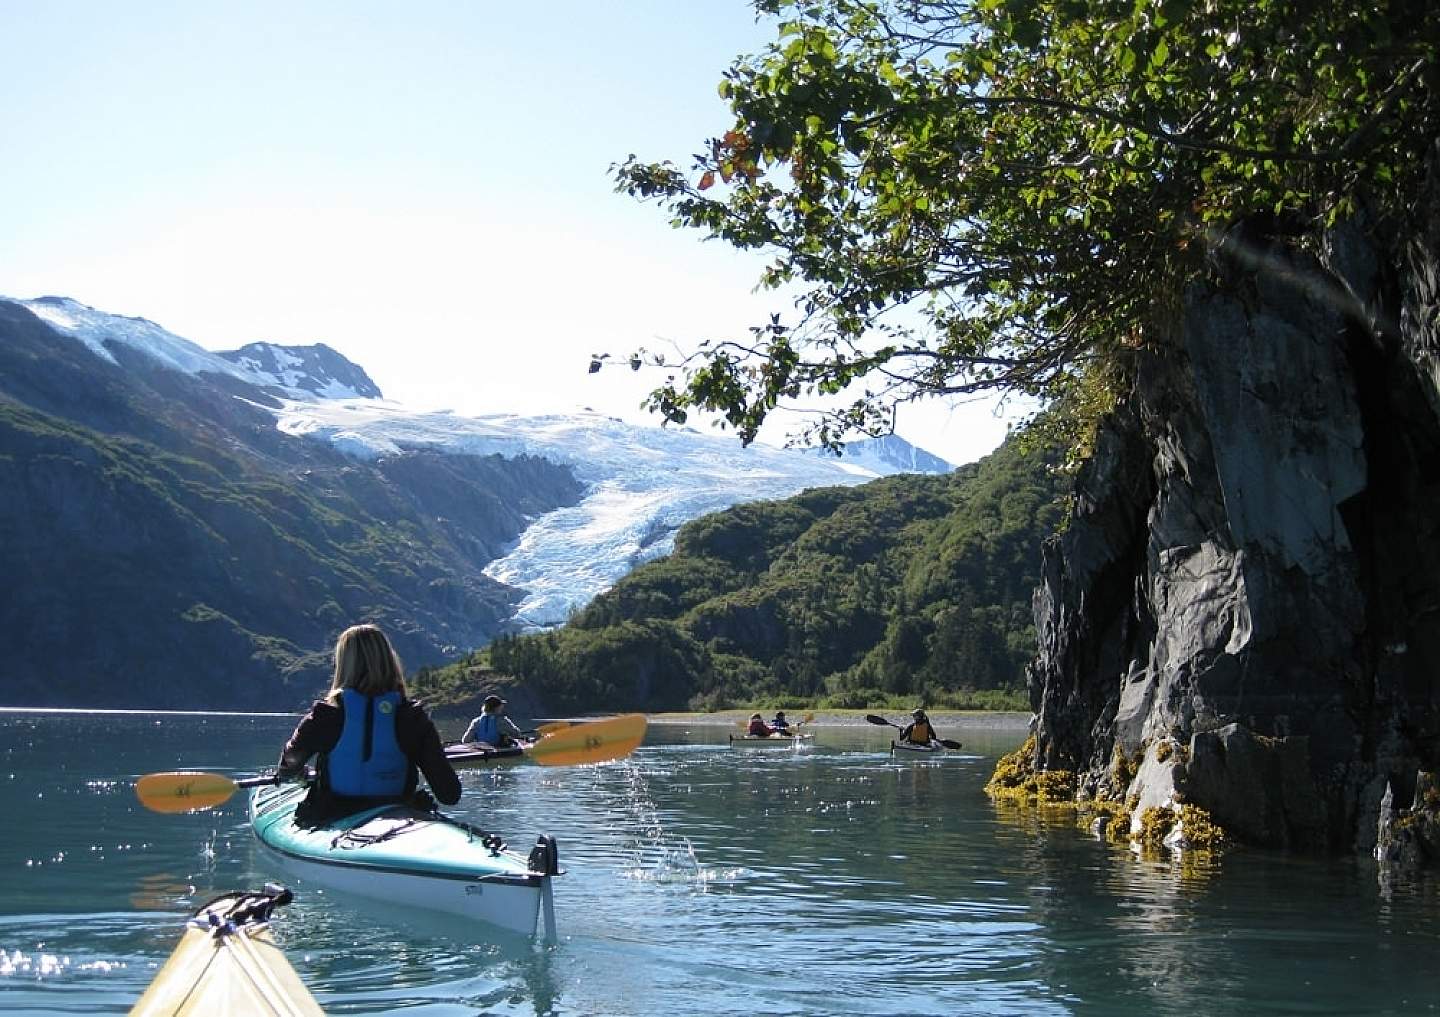 People kayaking in Prince William Sound near a glacier